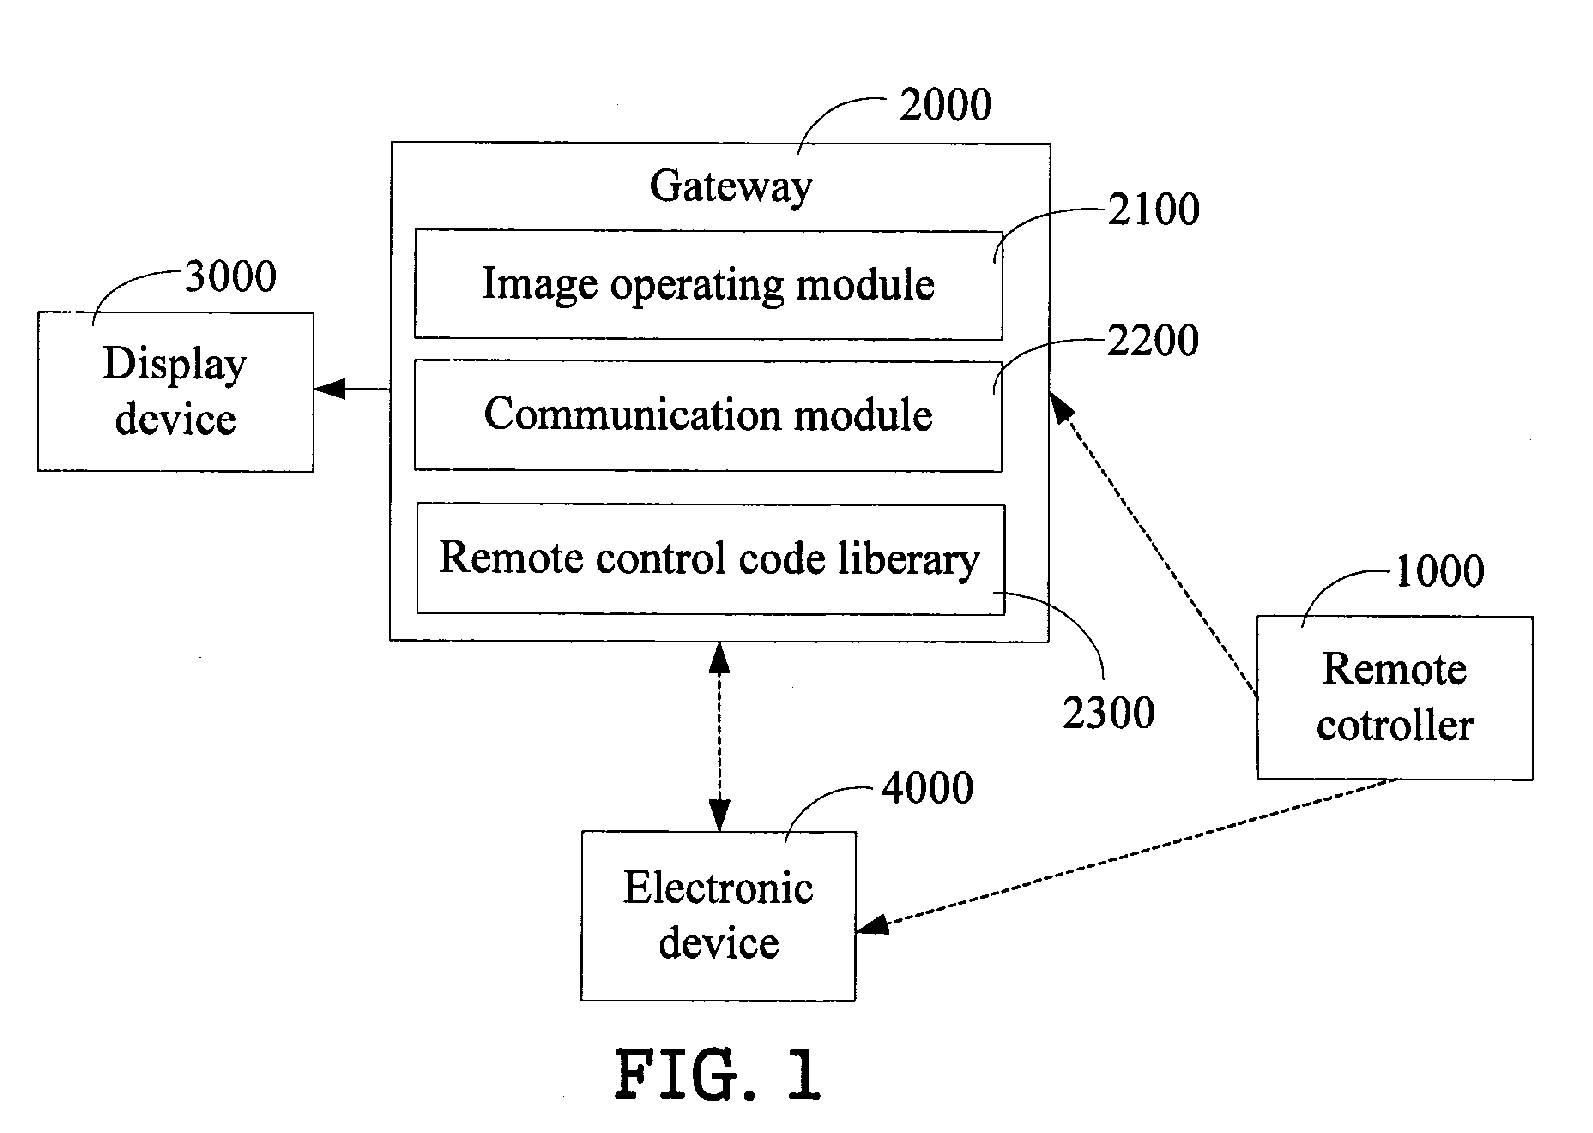 Remote controller and digital information control system employing the same